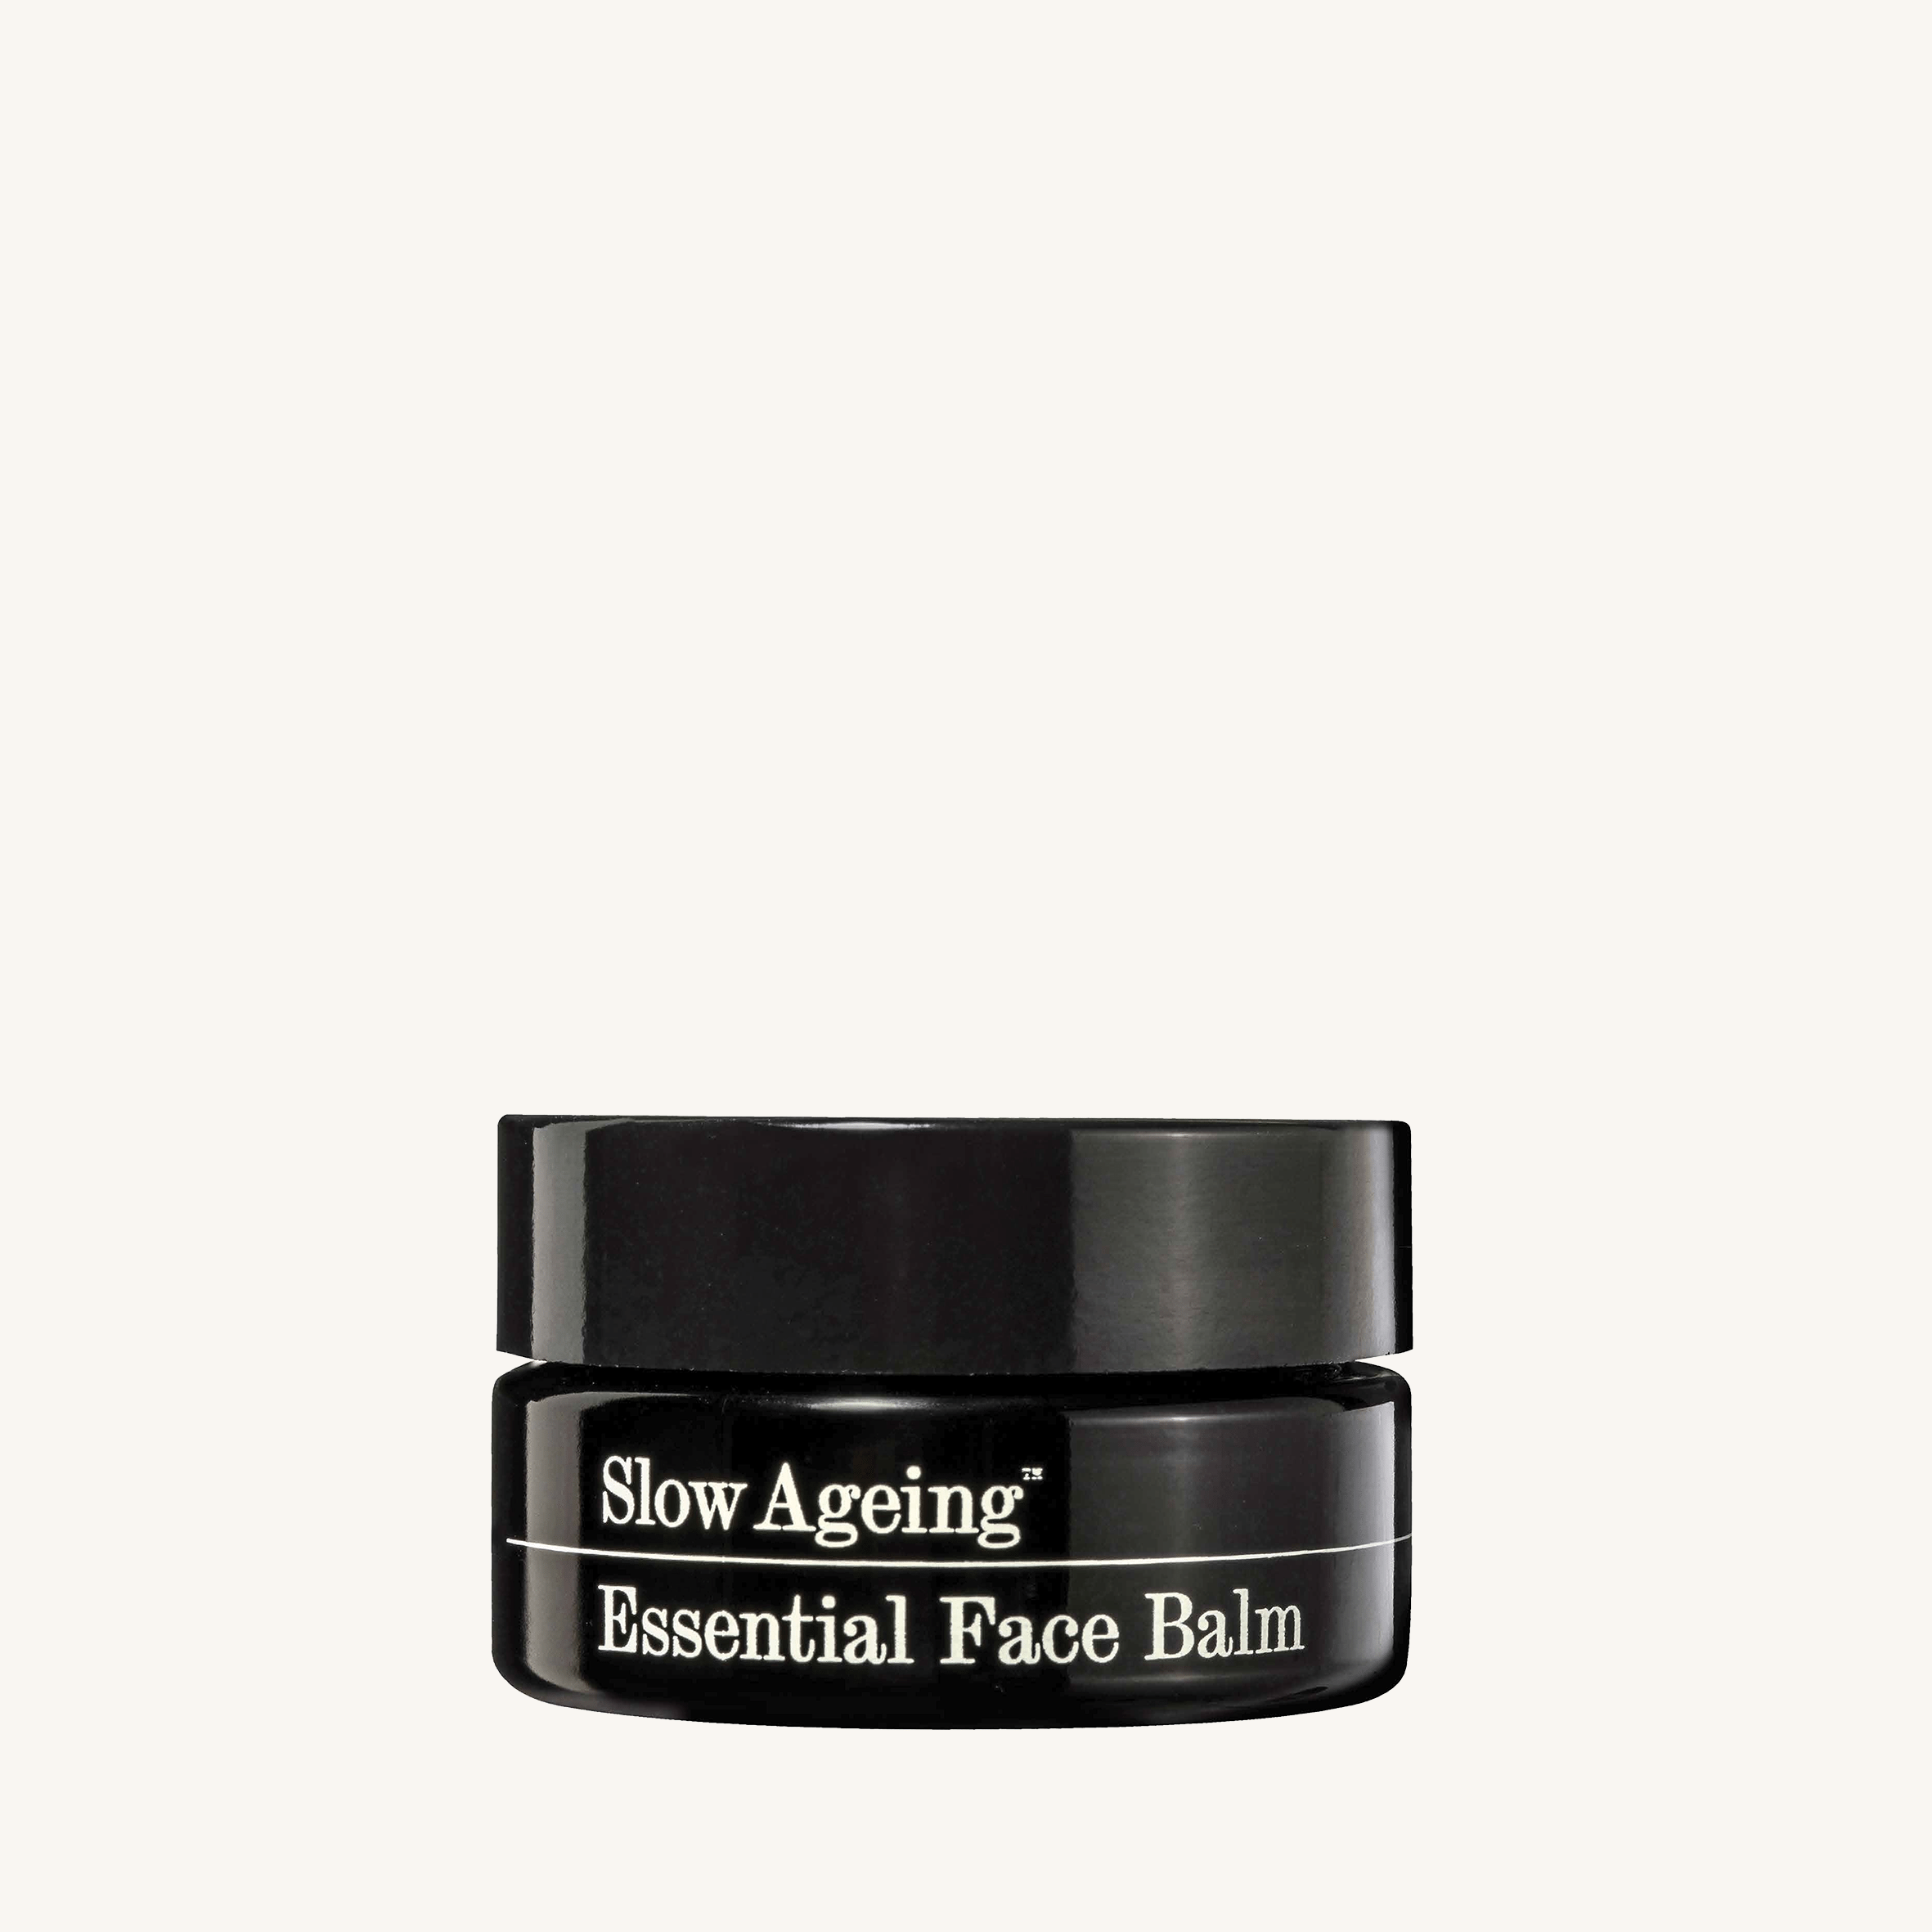 Essential Face Balm - Travel Size - Slow Ageing Essentials Slow Ageing Essentials